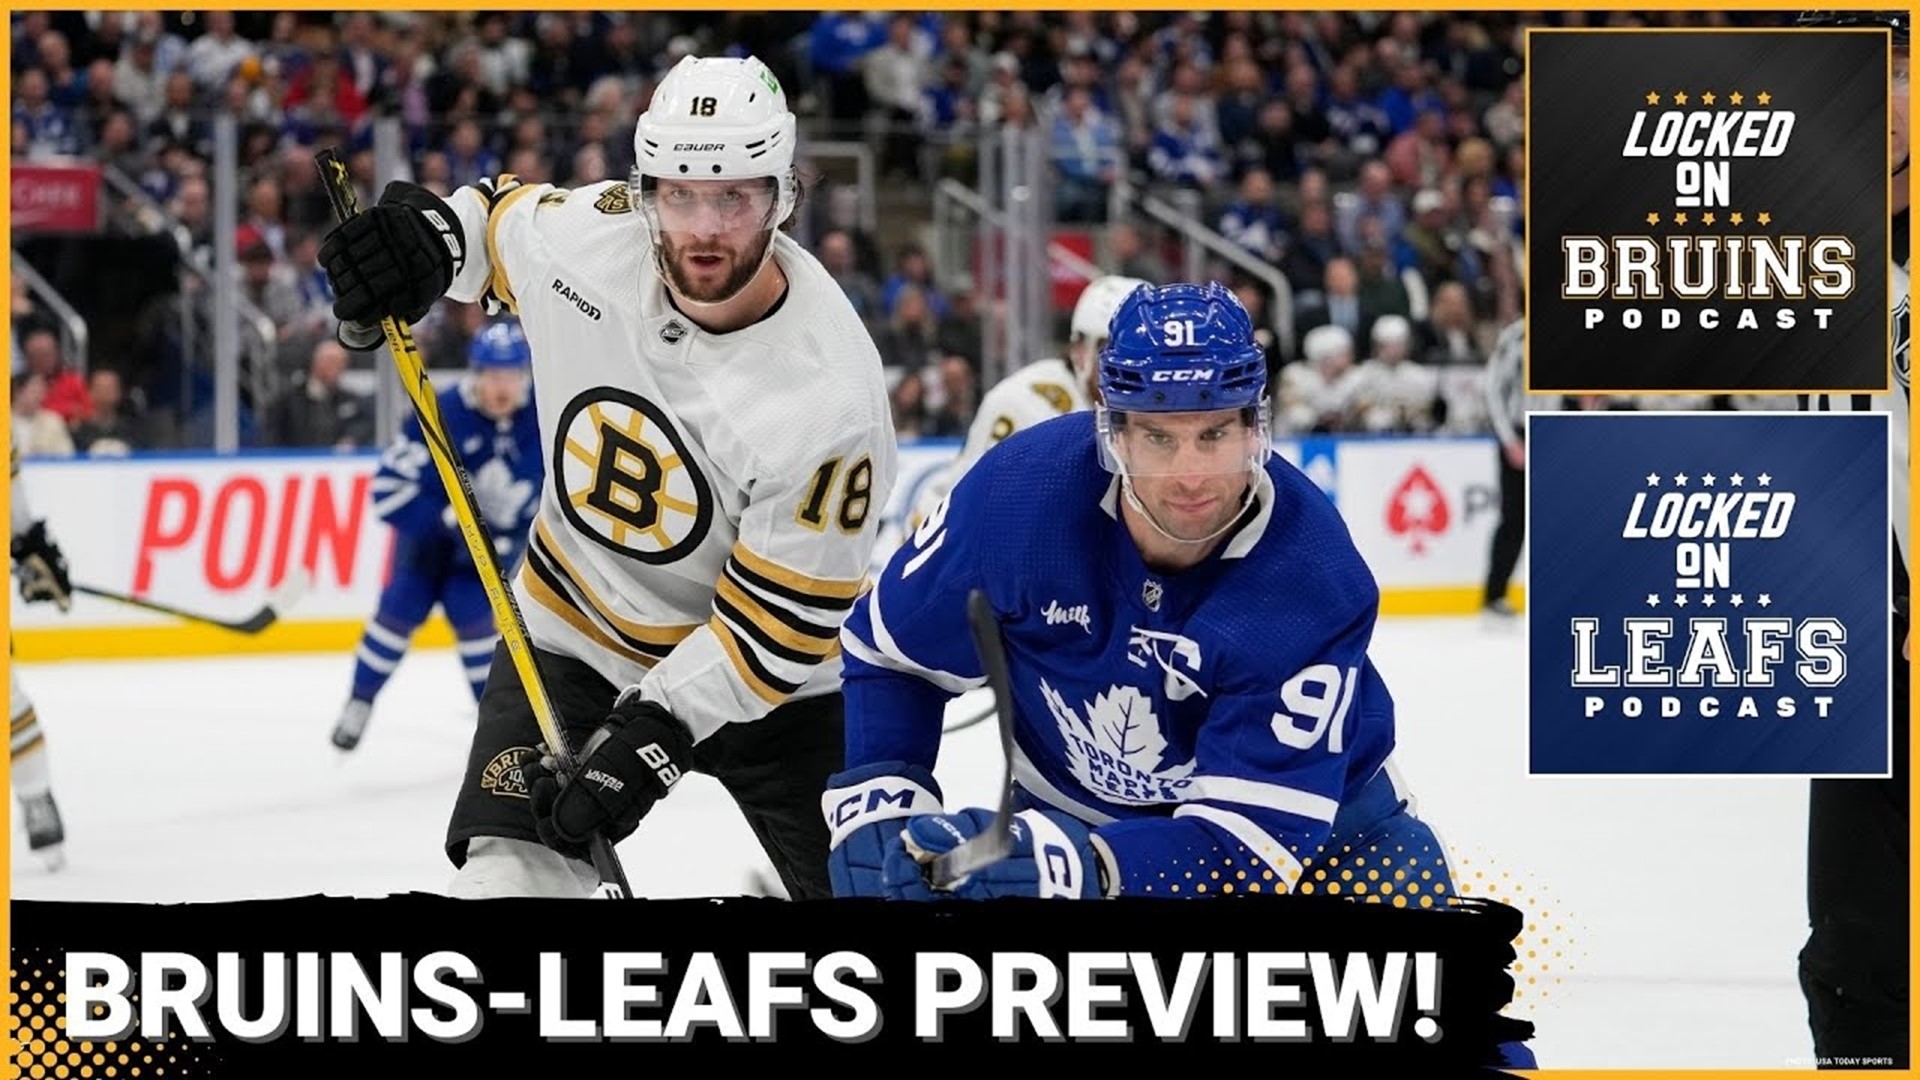 Here we go again. The Boston Bruins and Toronto Maple Leafs will meet in the first round of the Stanley Cup Playoffs for the fourth time in 11 years.